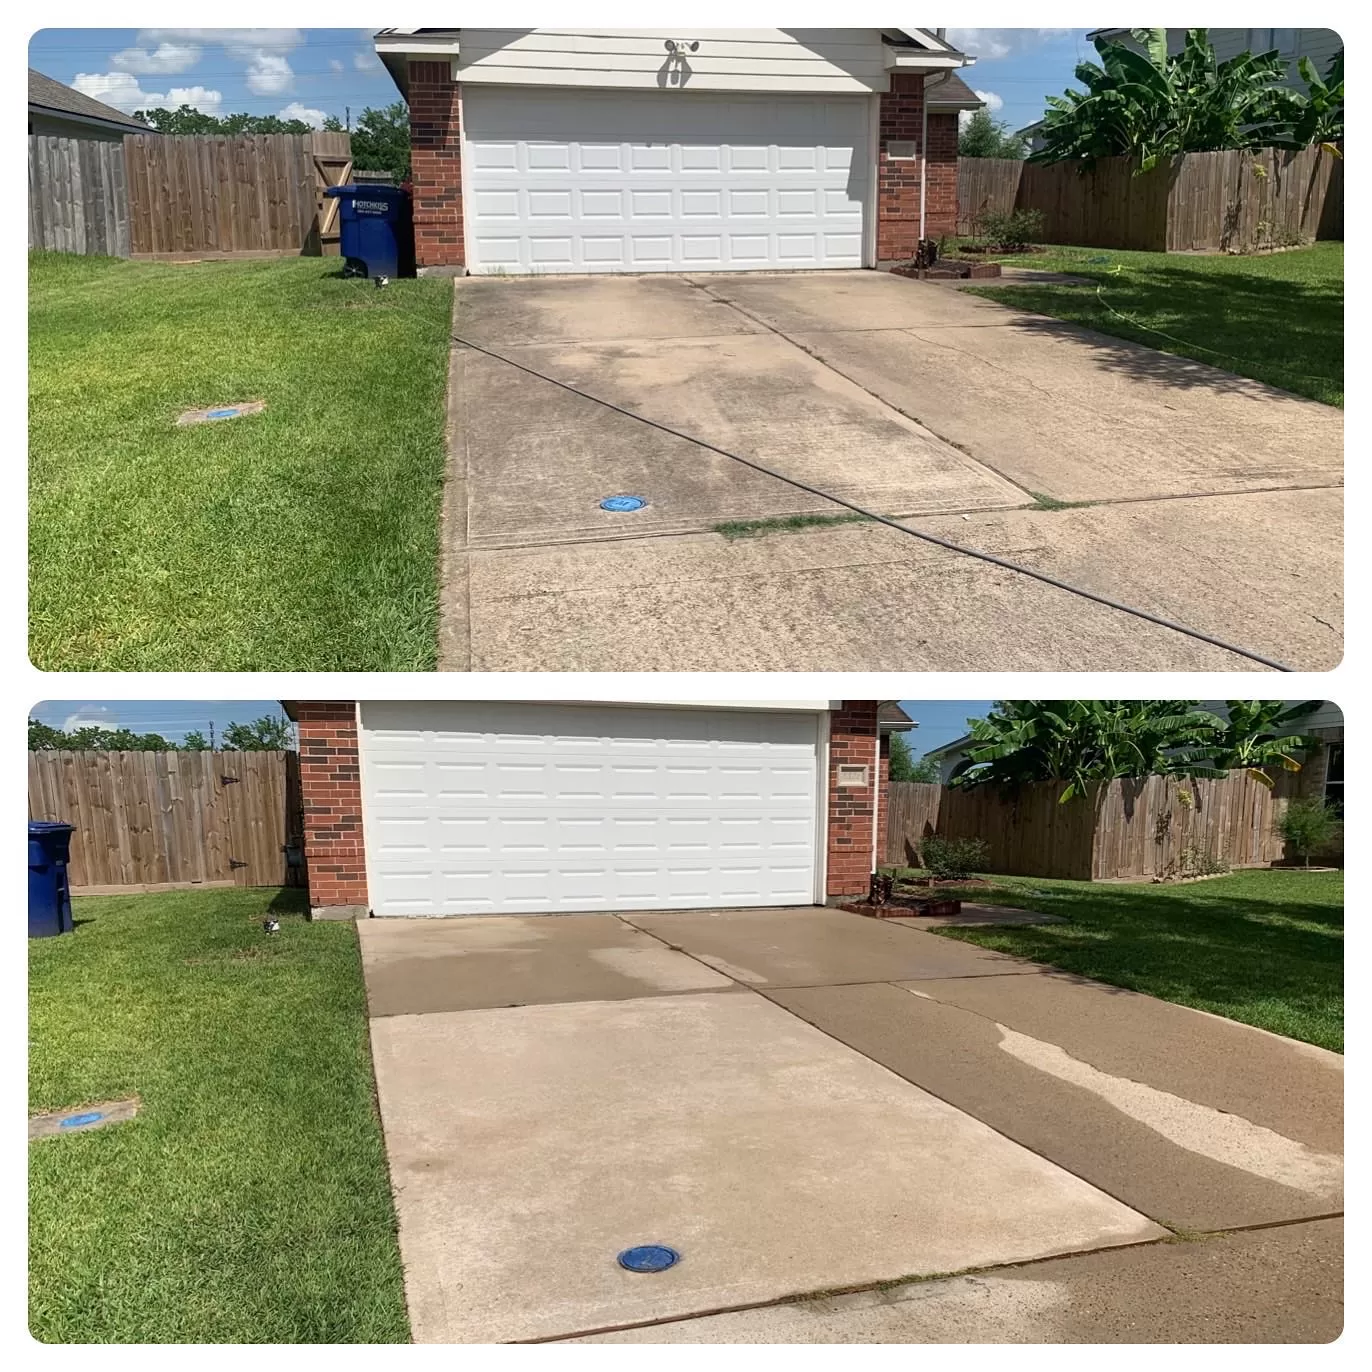 House Washing and Driveway Cleaning in Baytown, TX